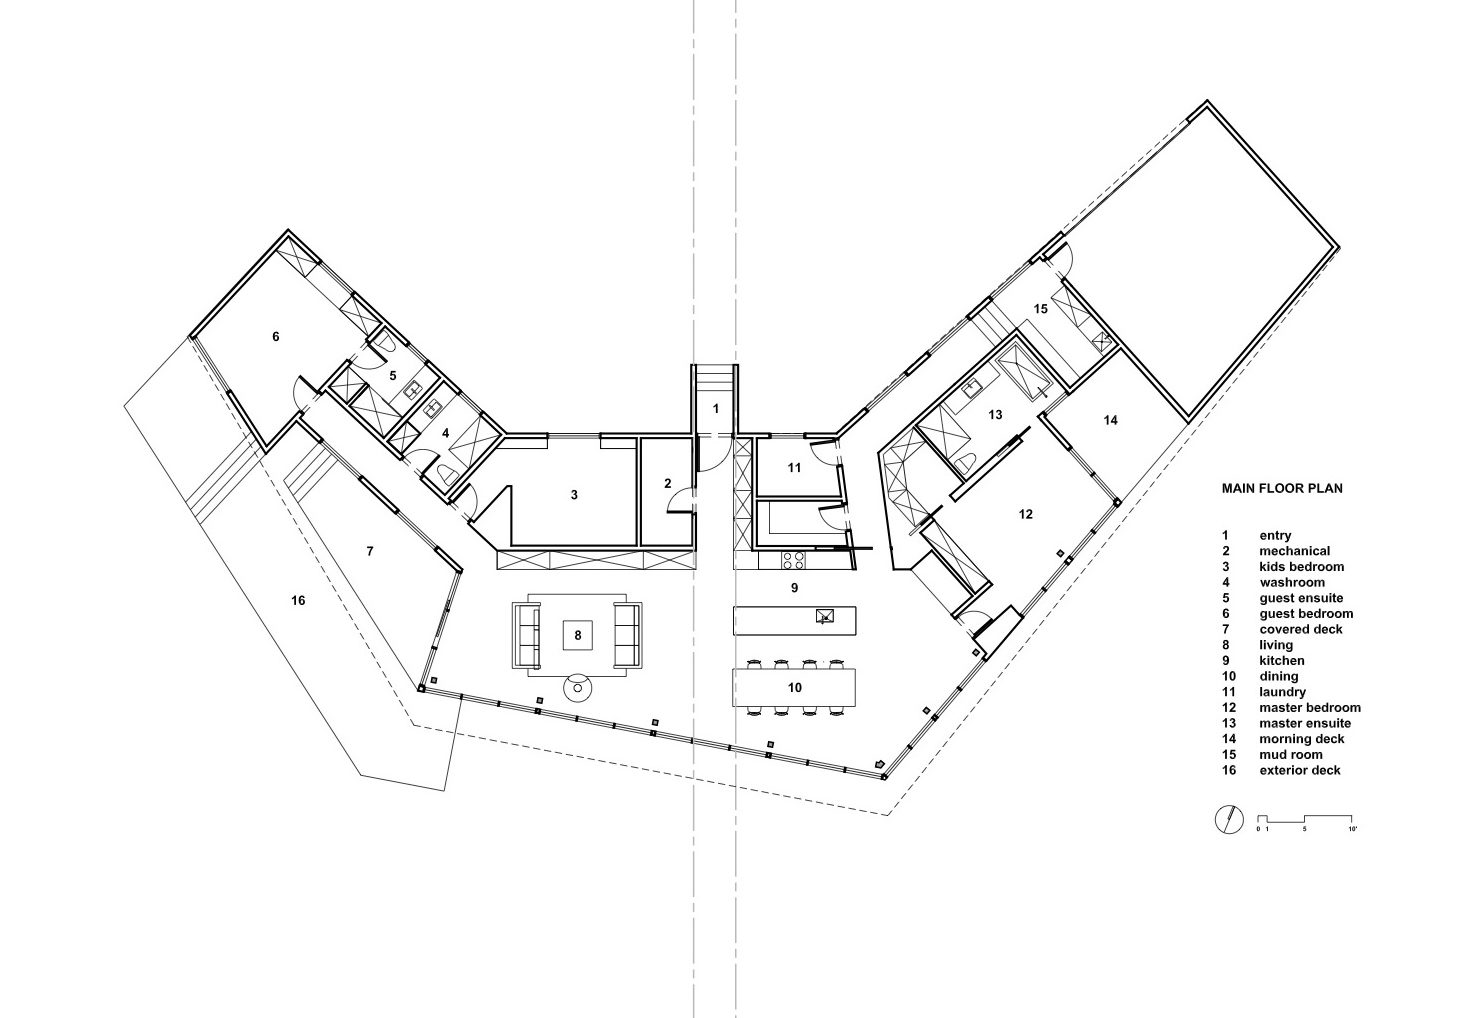 Architectural Drawings 8 Coastal Homes With Open Floor Plans